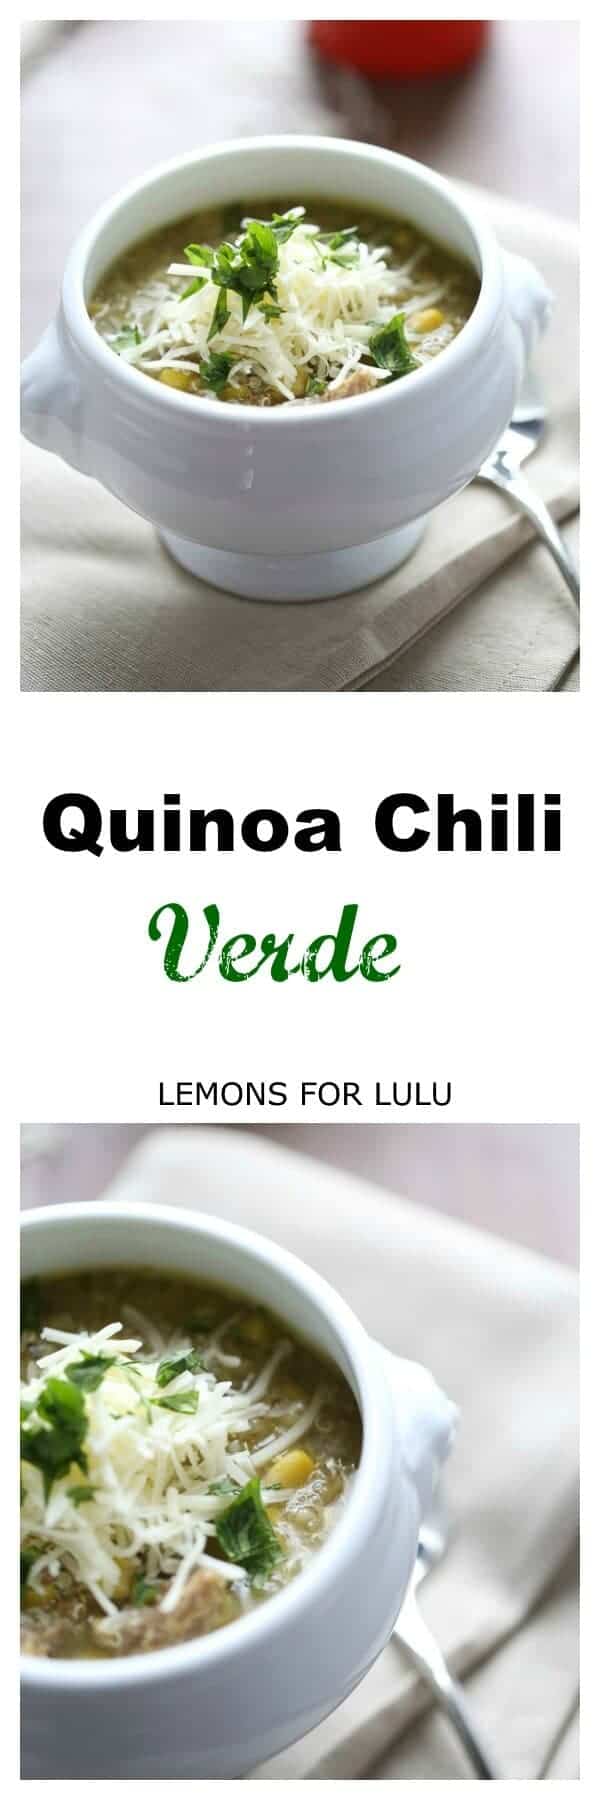 Quinoa Chili Verde has smoky vegetables, flavorful pork and satisfying quinoa! It’s the perfect meal! lemonsforlulu.com